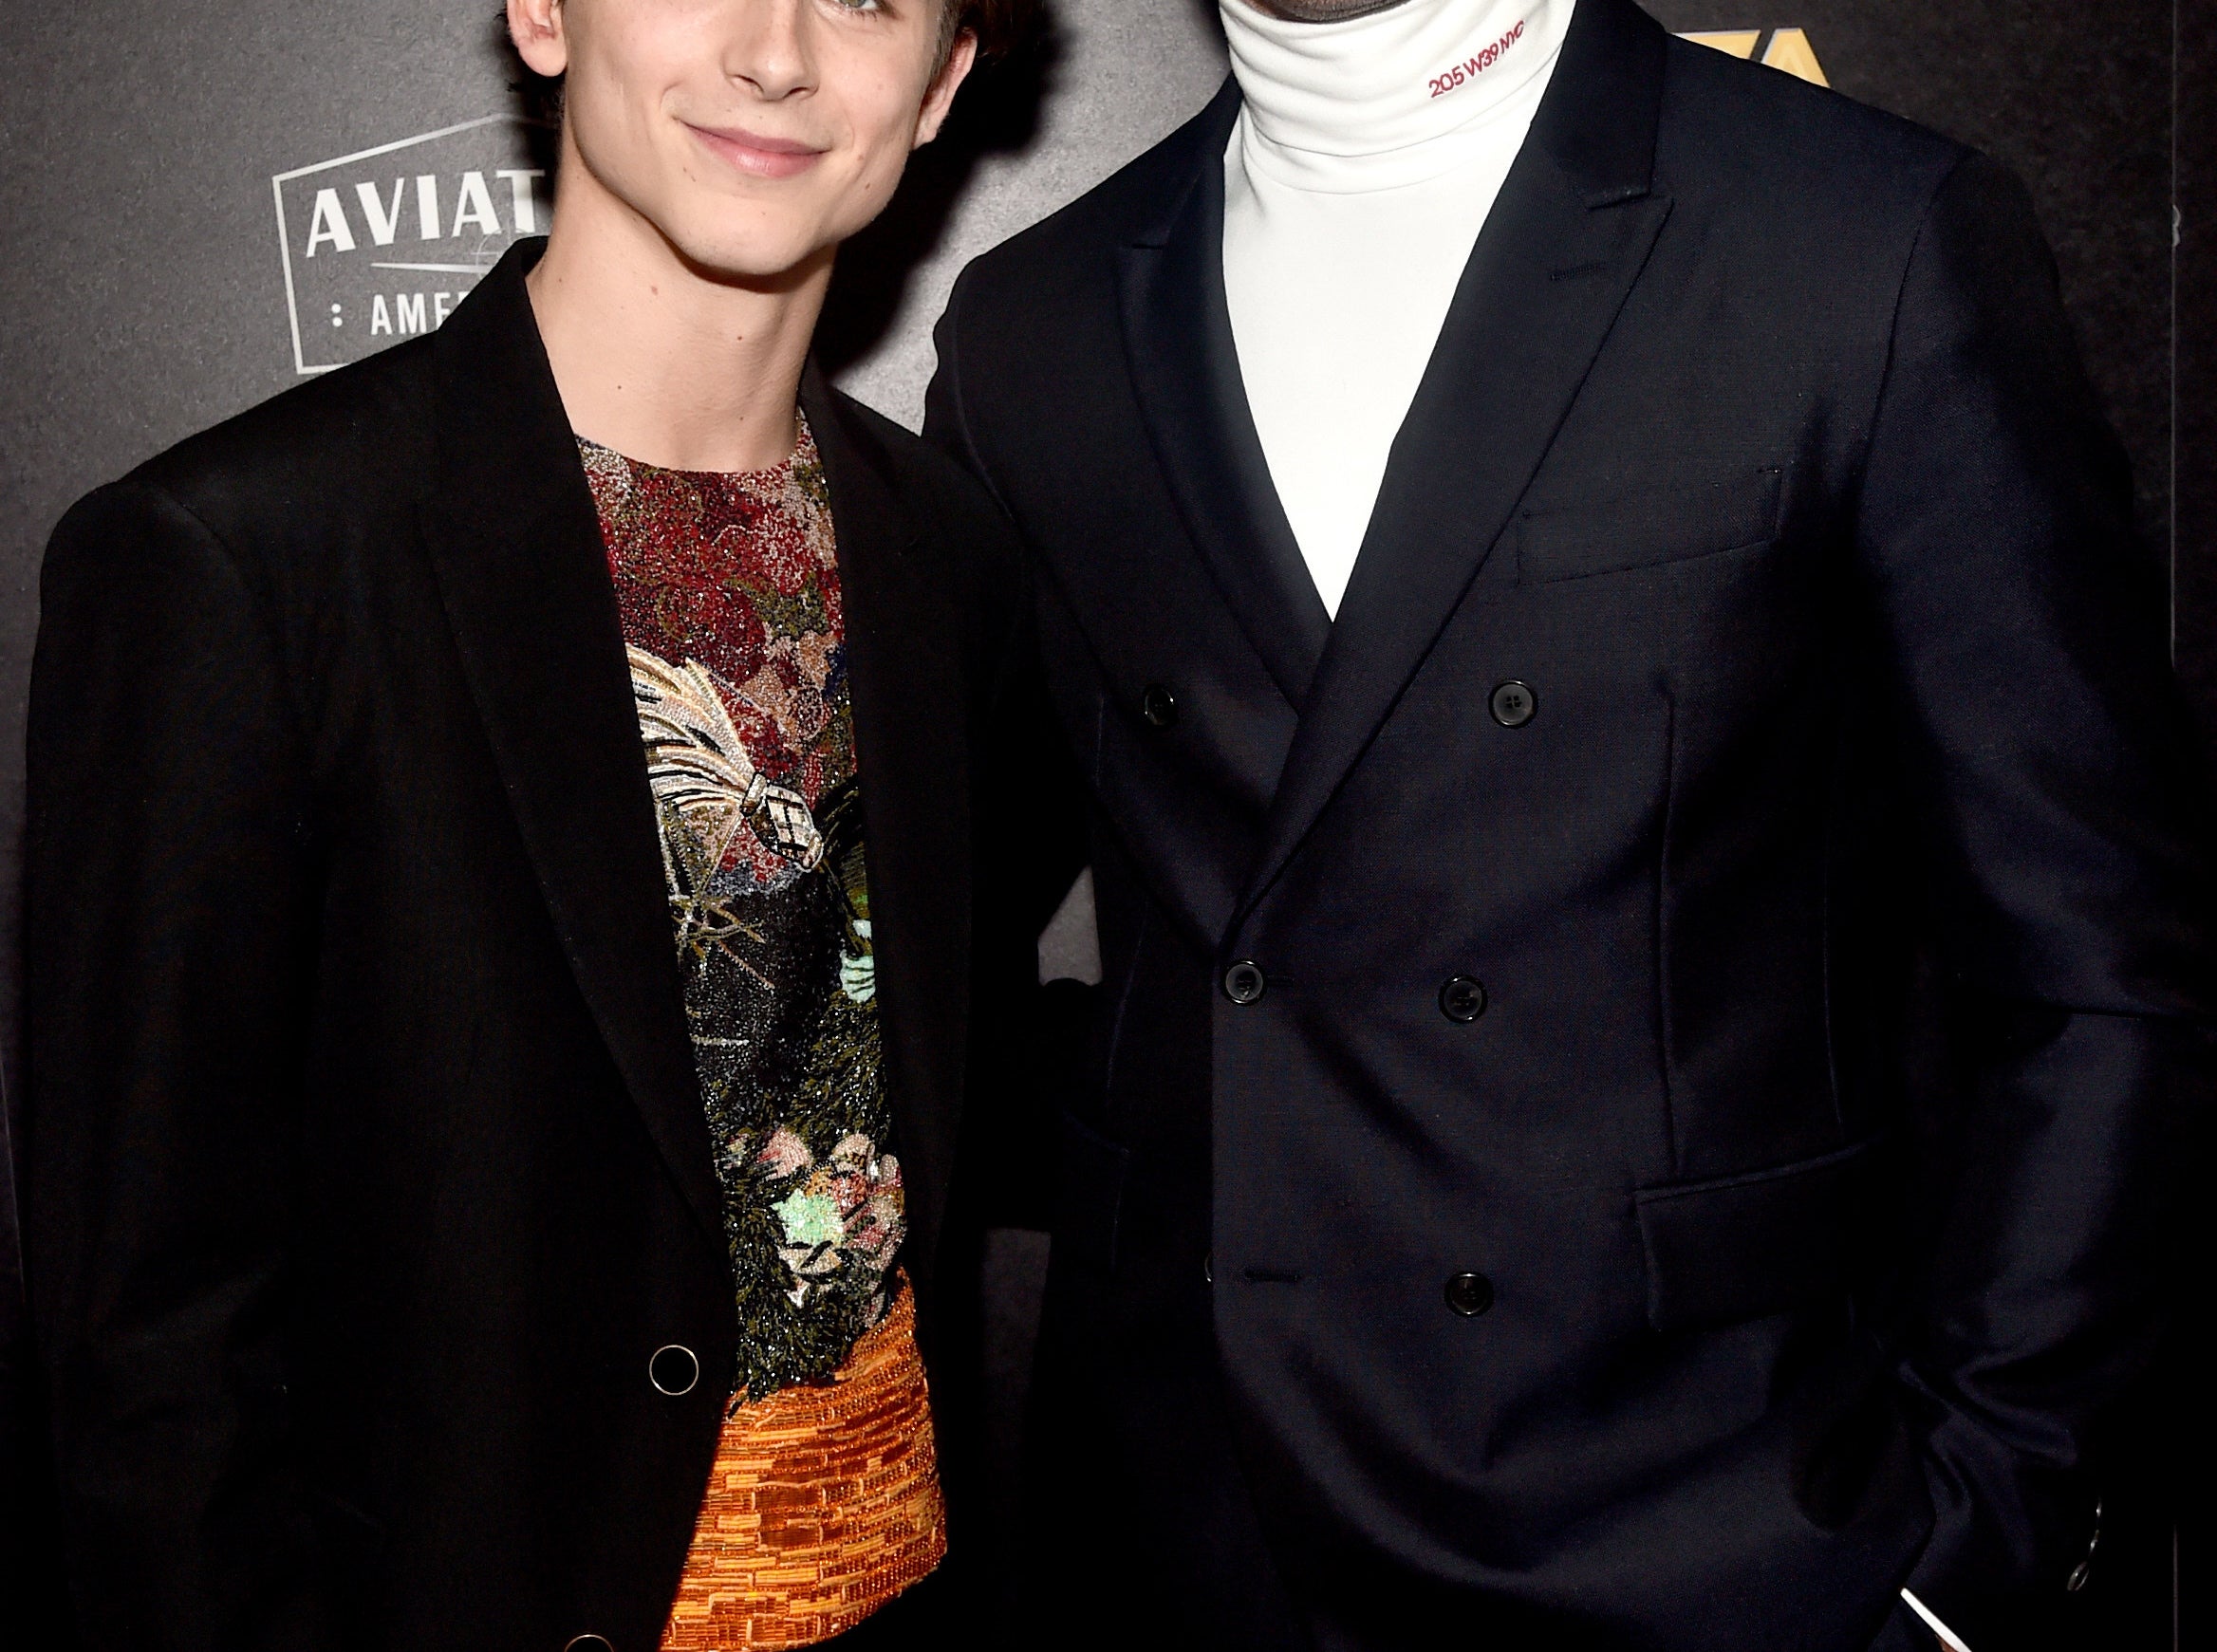 Armie and Timothee attend an event